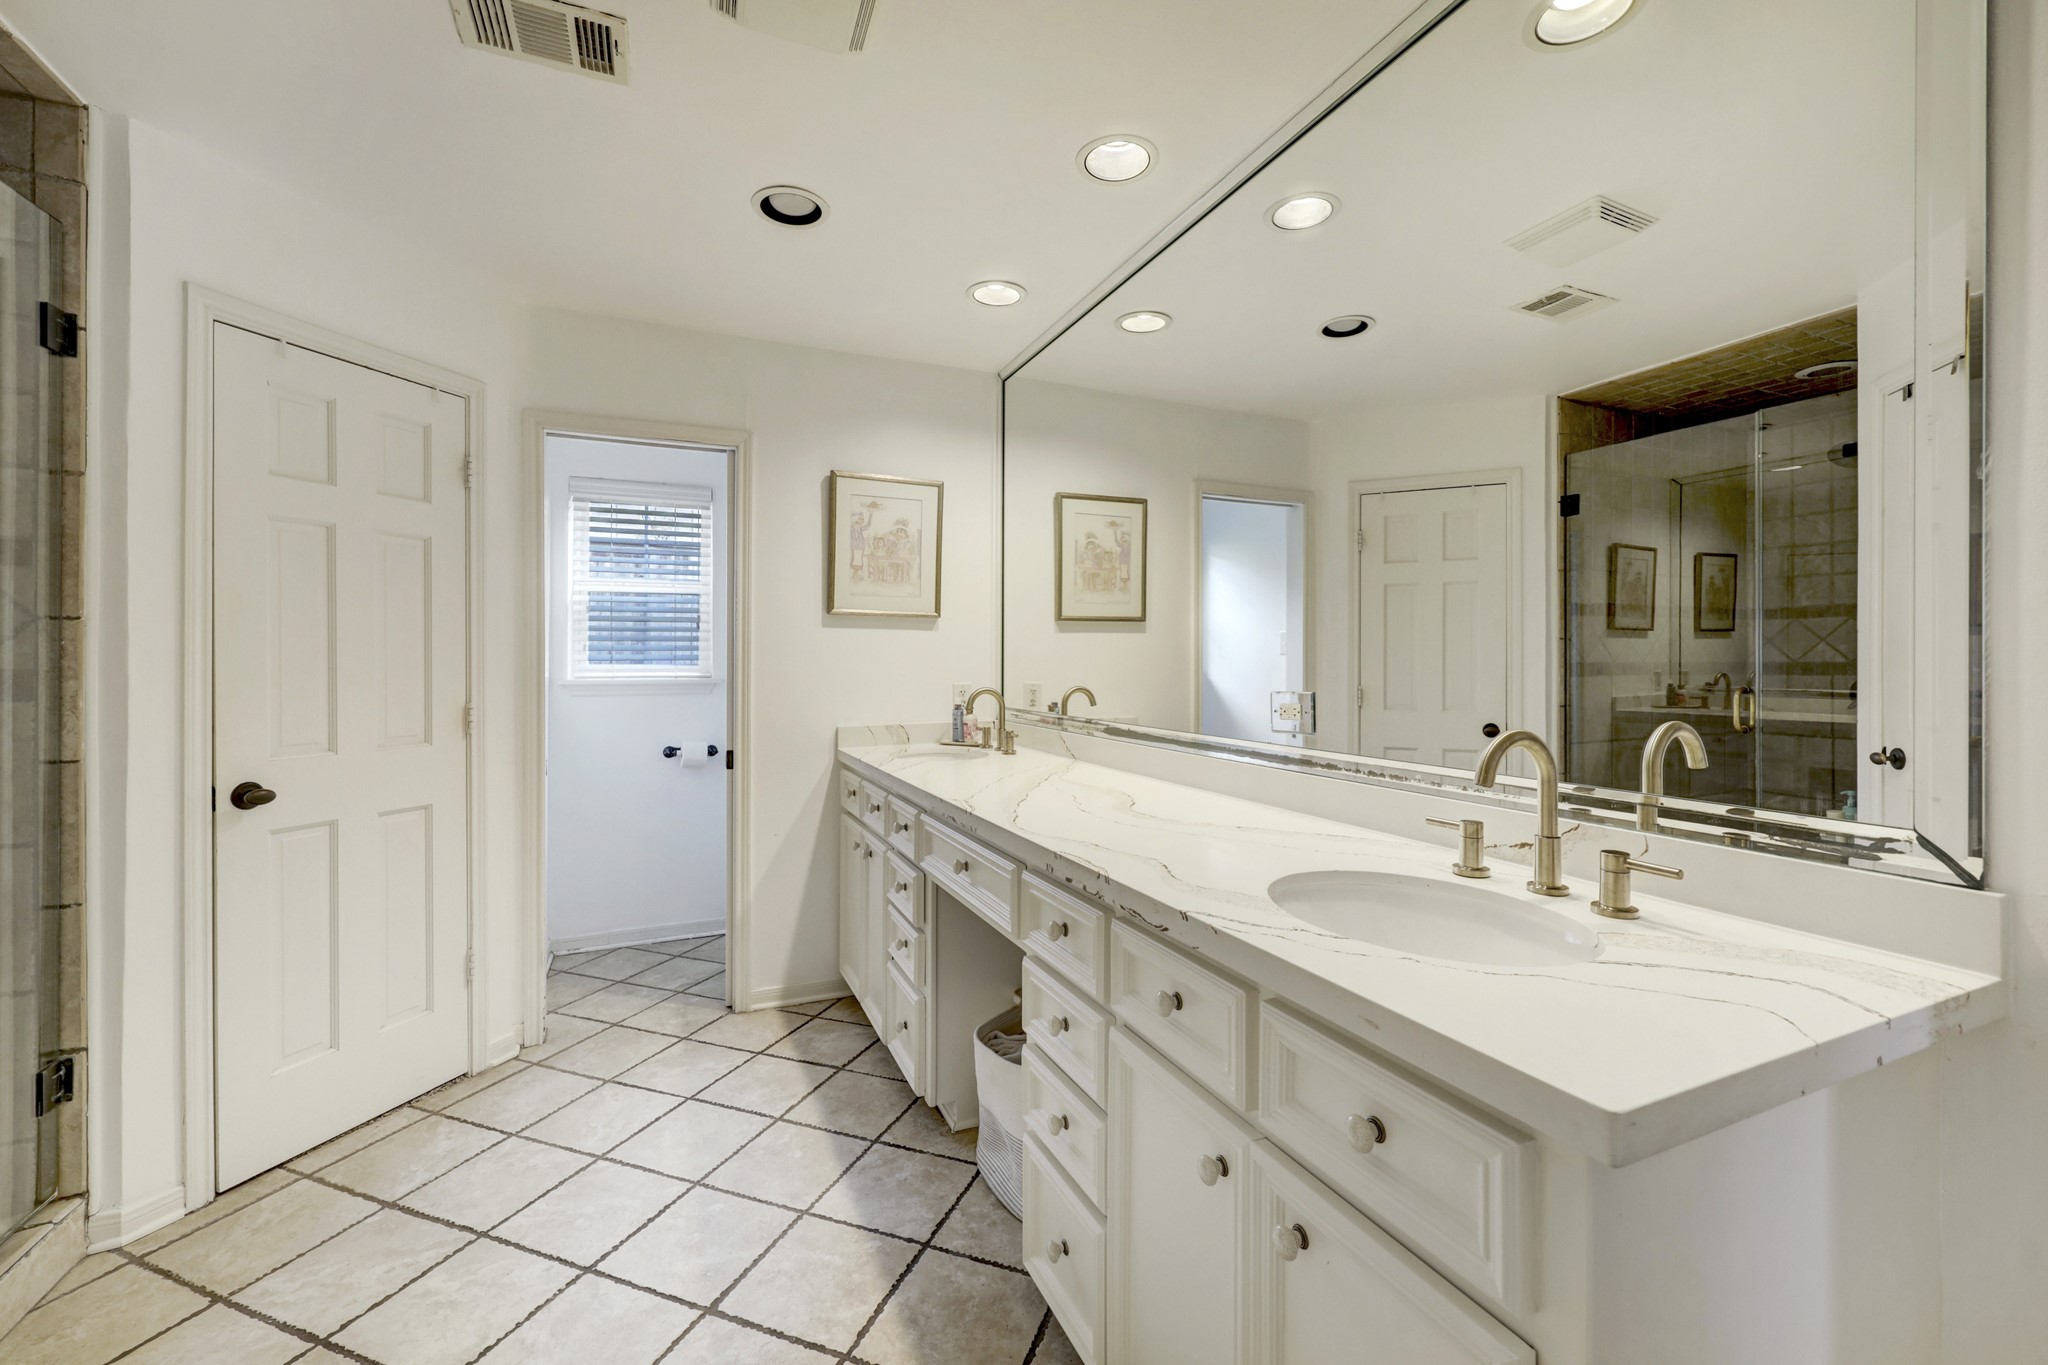 Primary bath offers updated fixtures and Quartz countertops. There are two walk-in closets on either side of the shower.